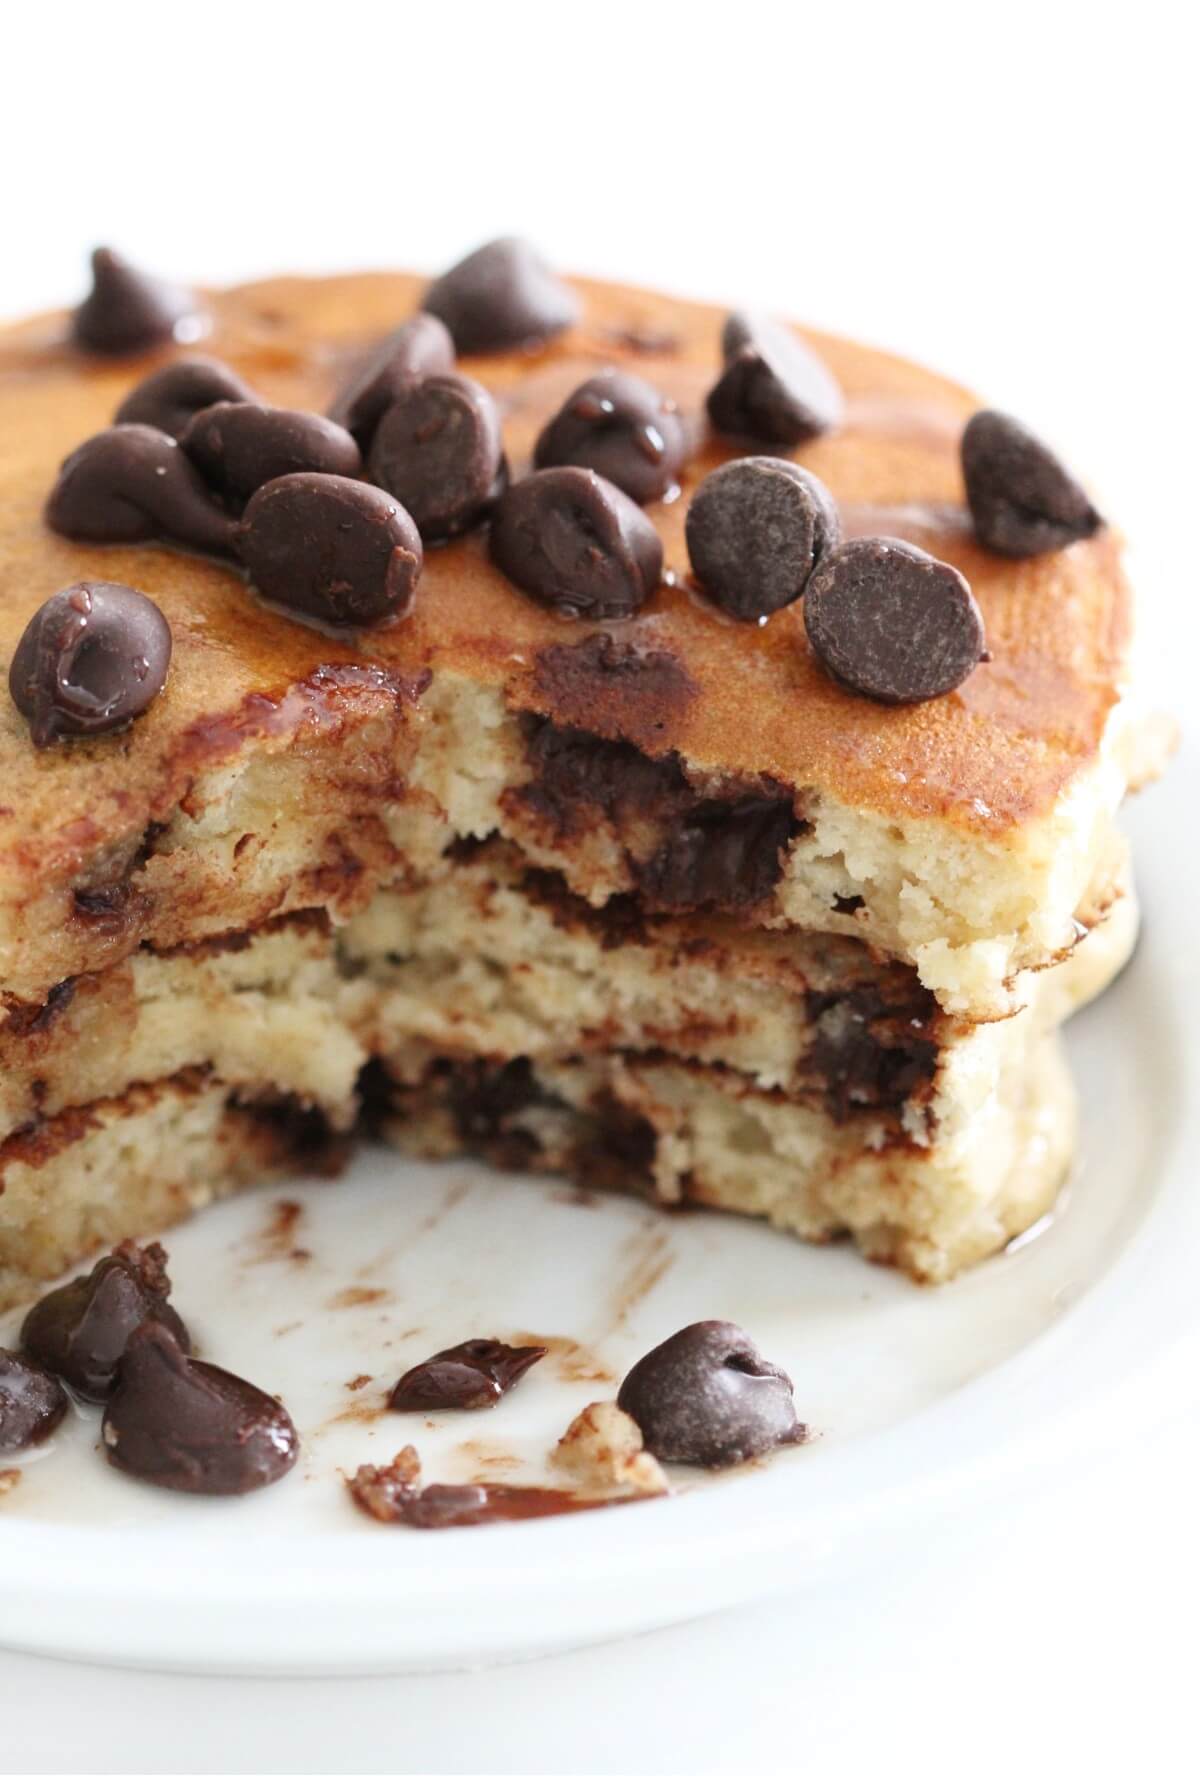 inside look of fluffy gluten-free chocolate chip pancakes